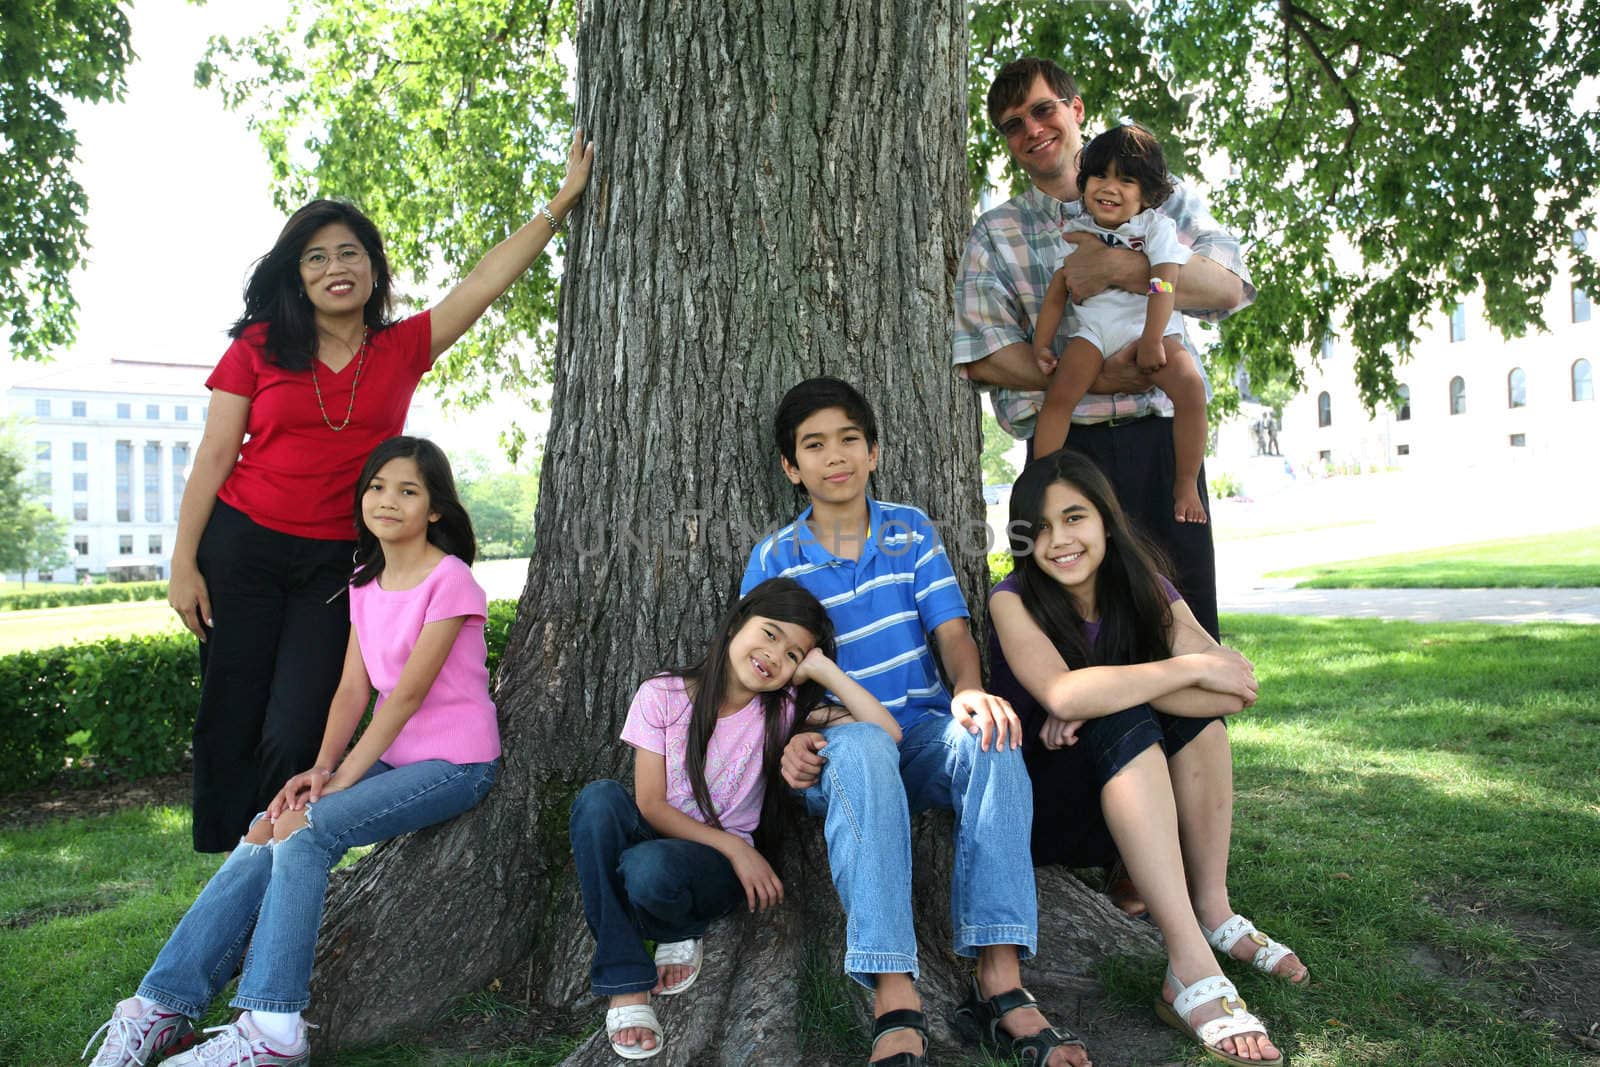 Large multiracial family of seven